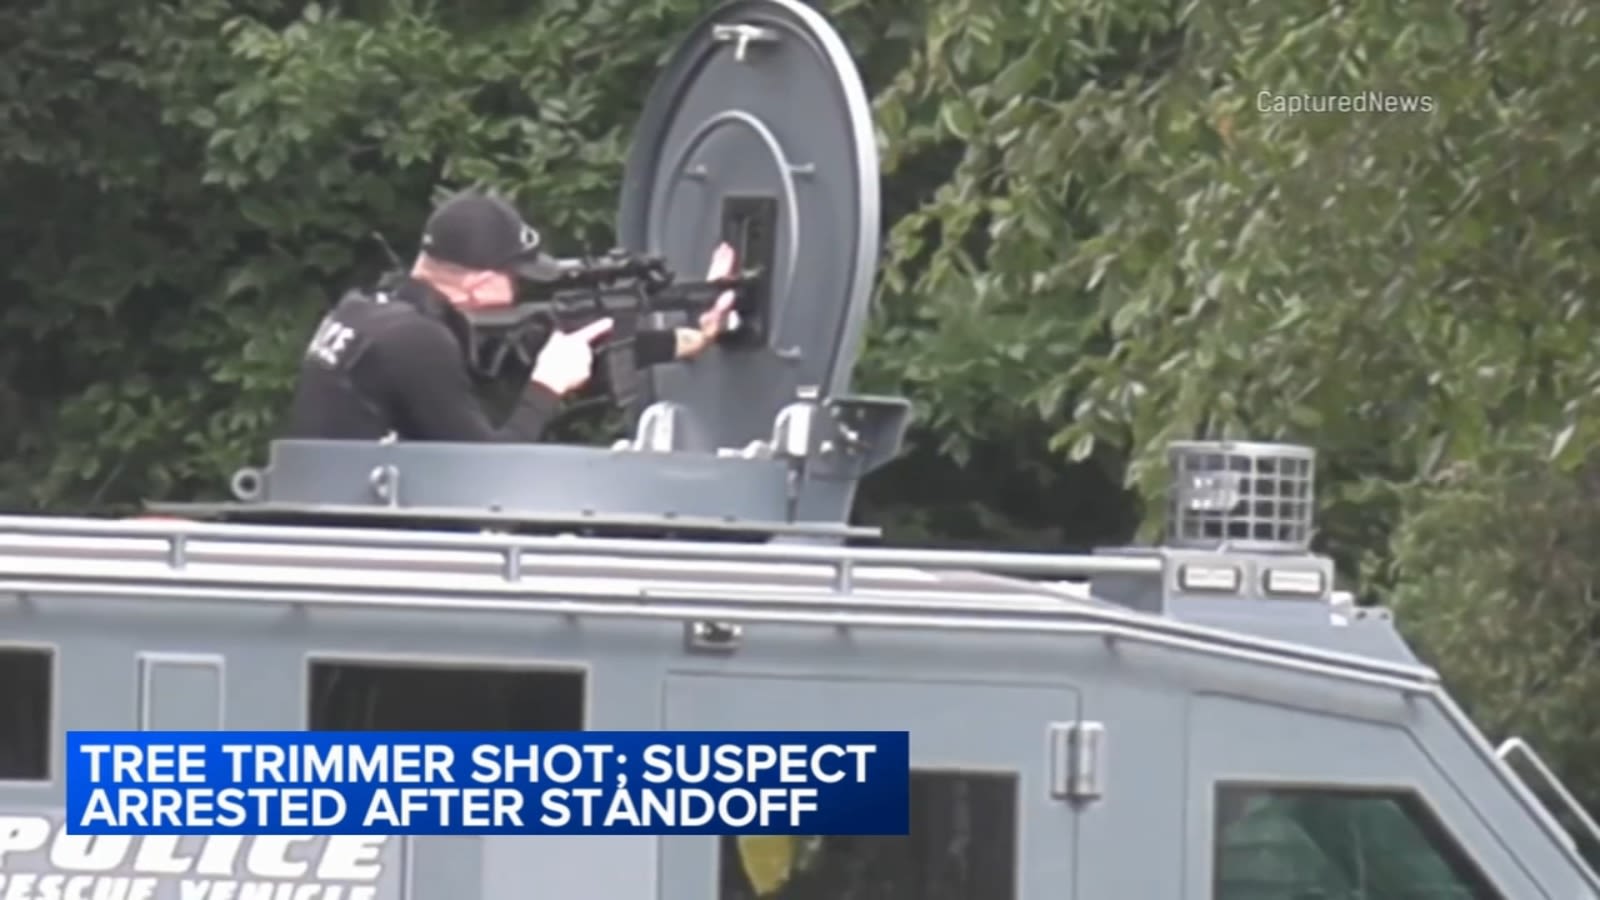 Residents react after man allegedly shoots tree trimmer over noise, leading to standoff | Video